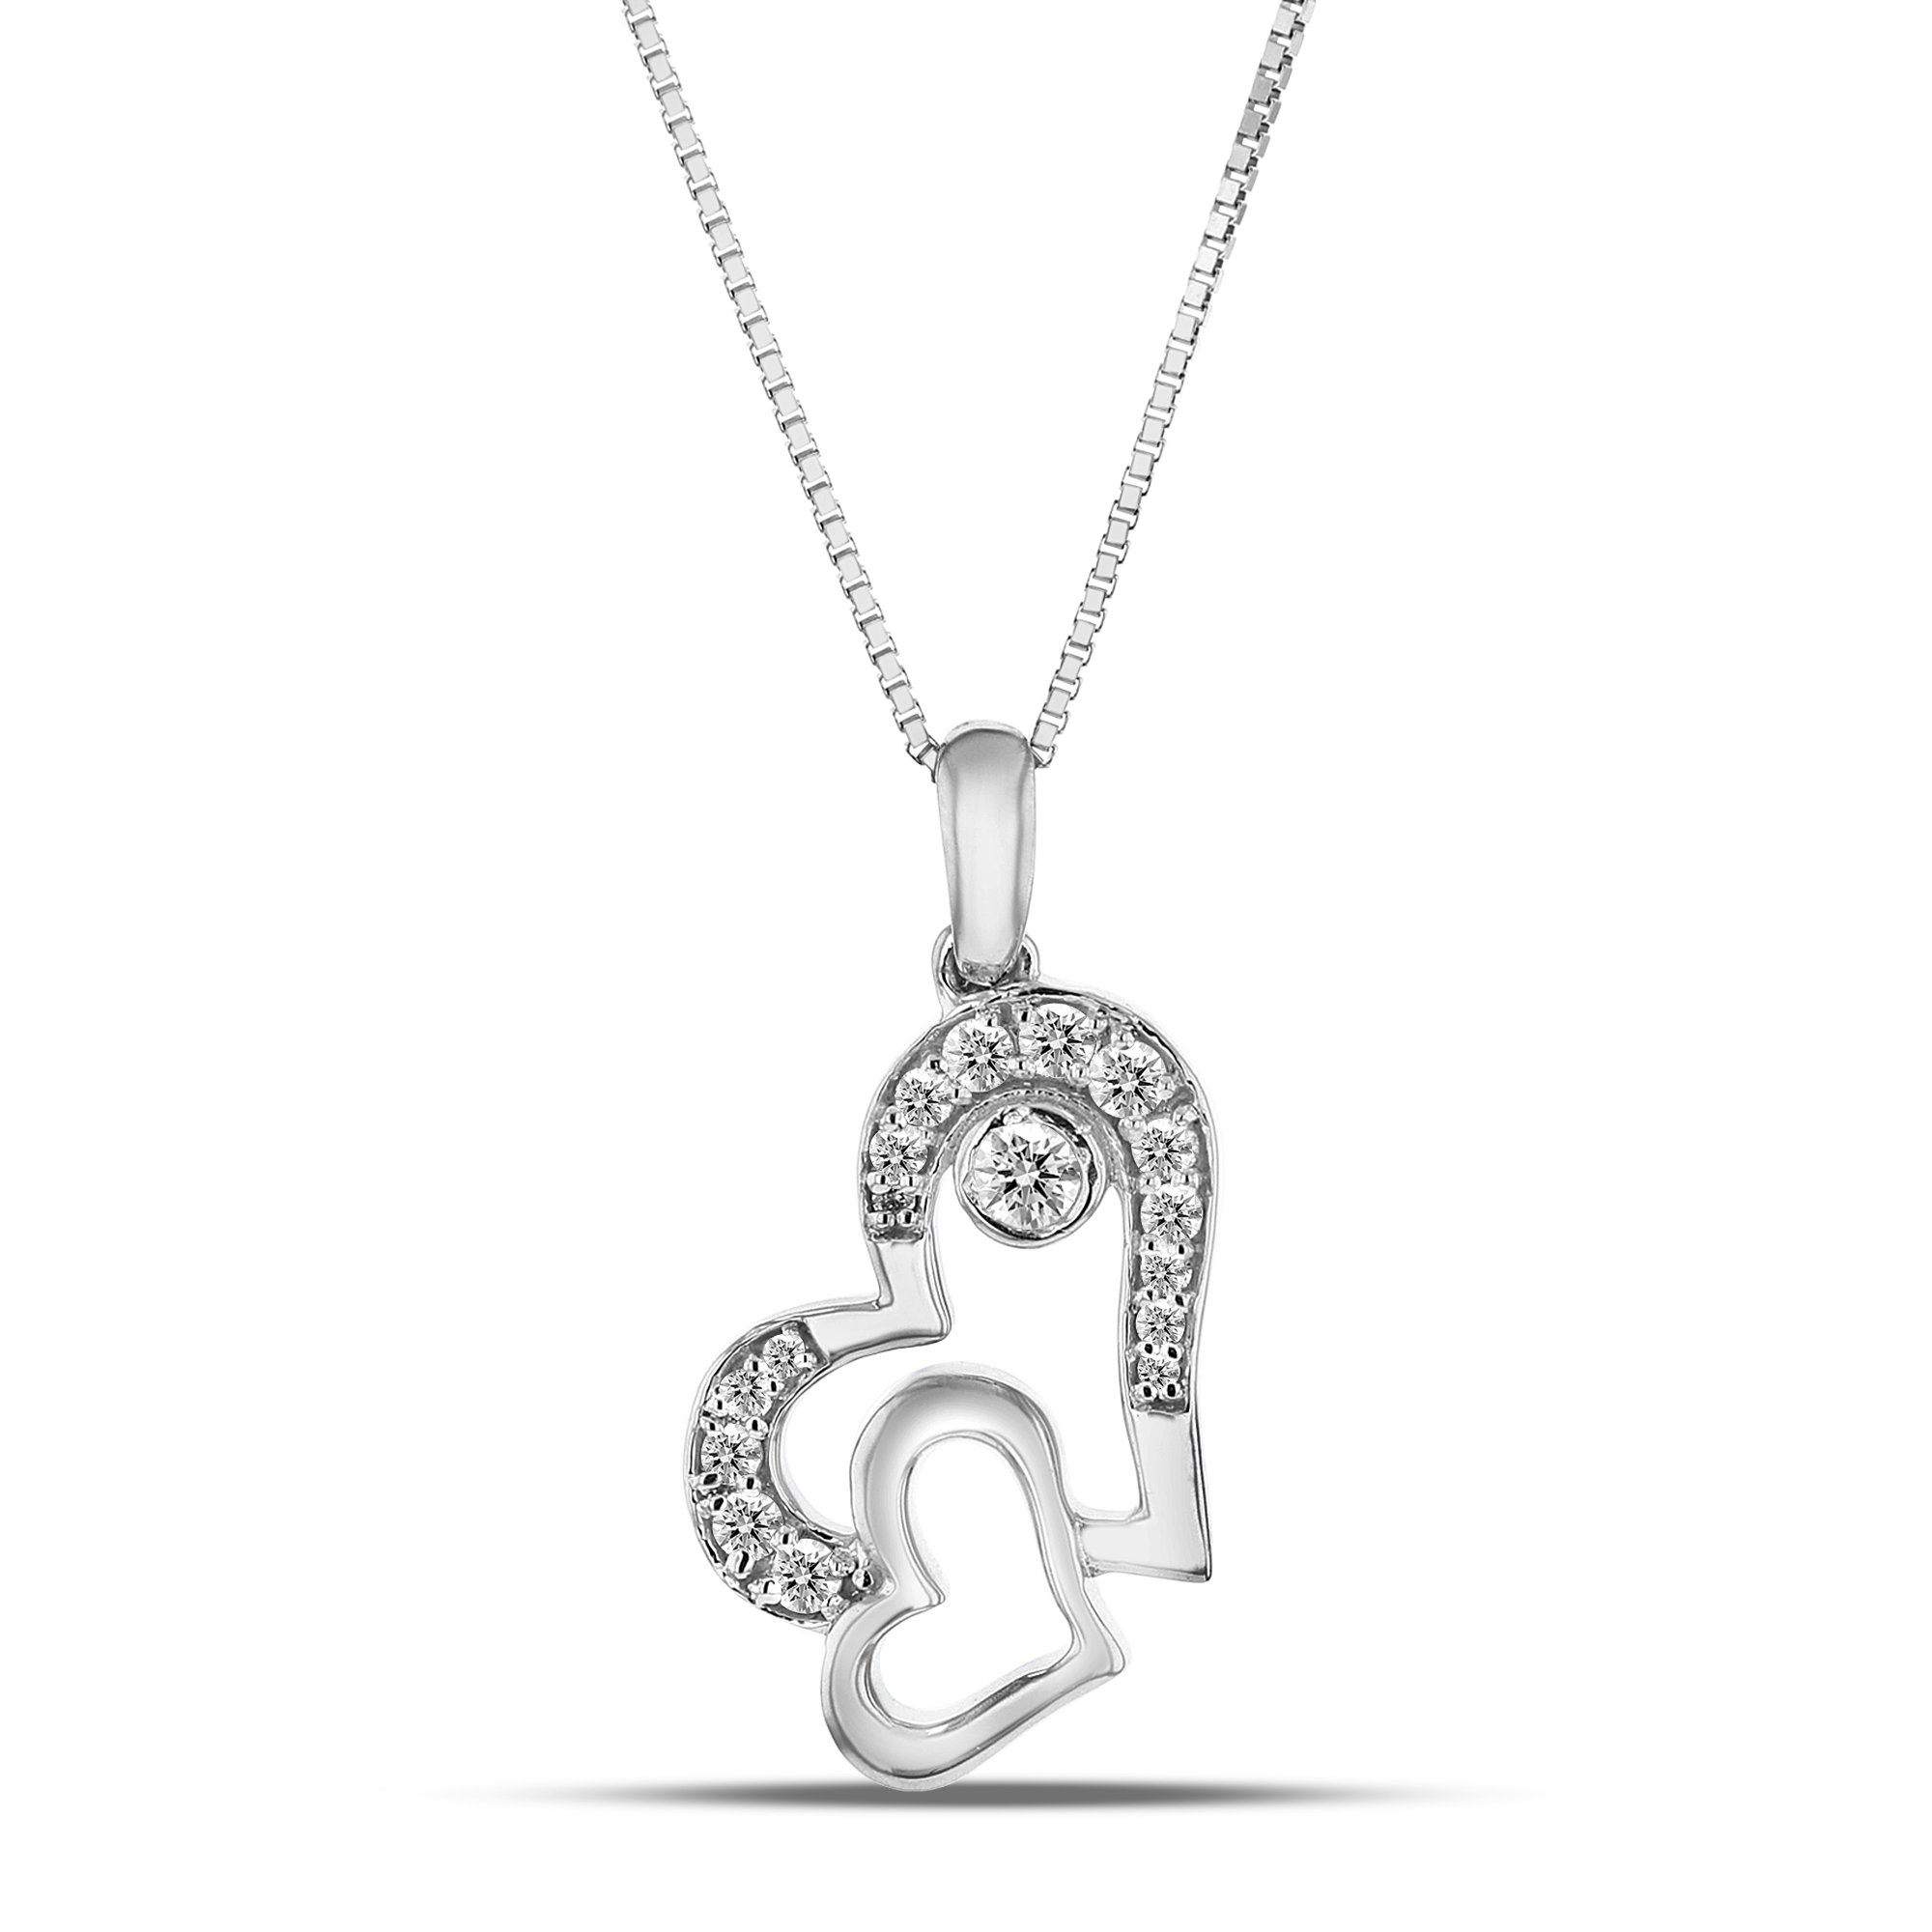 View 0.13ctw Diamond Double Heart Shaped Pendant in 14k Gold